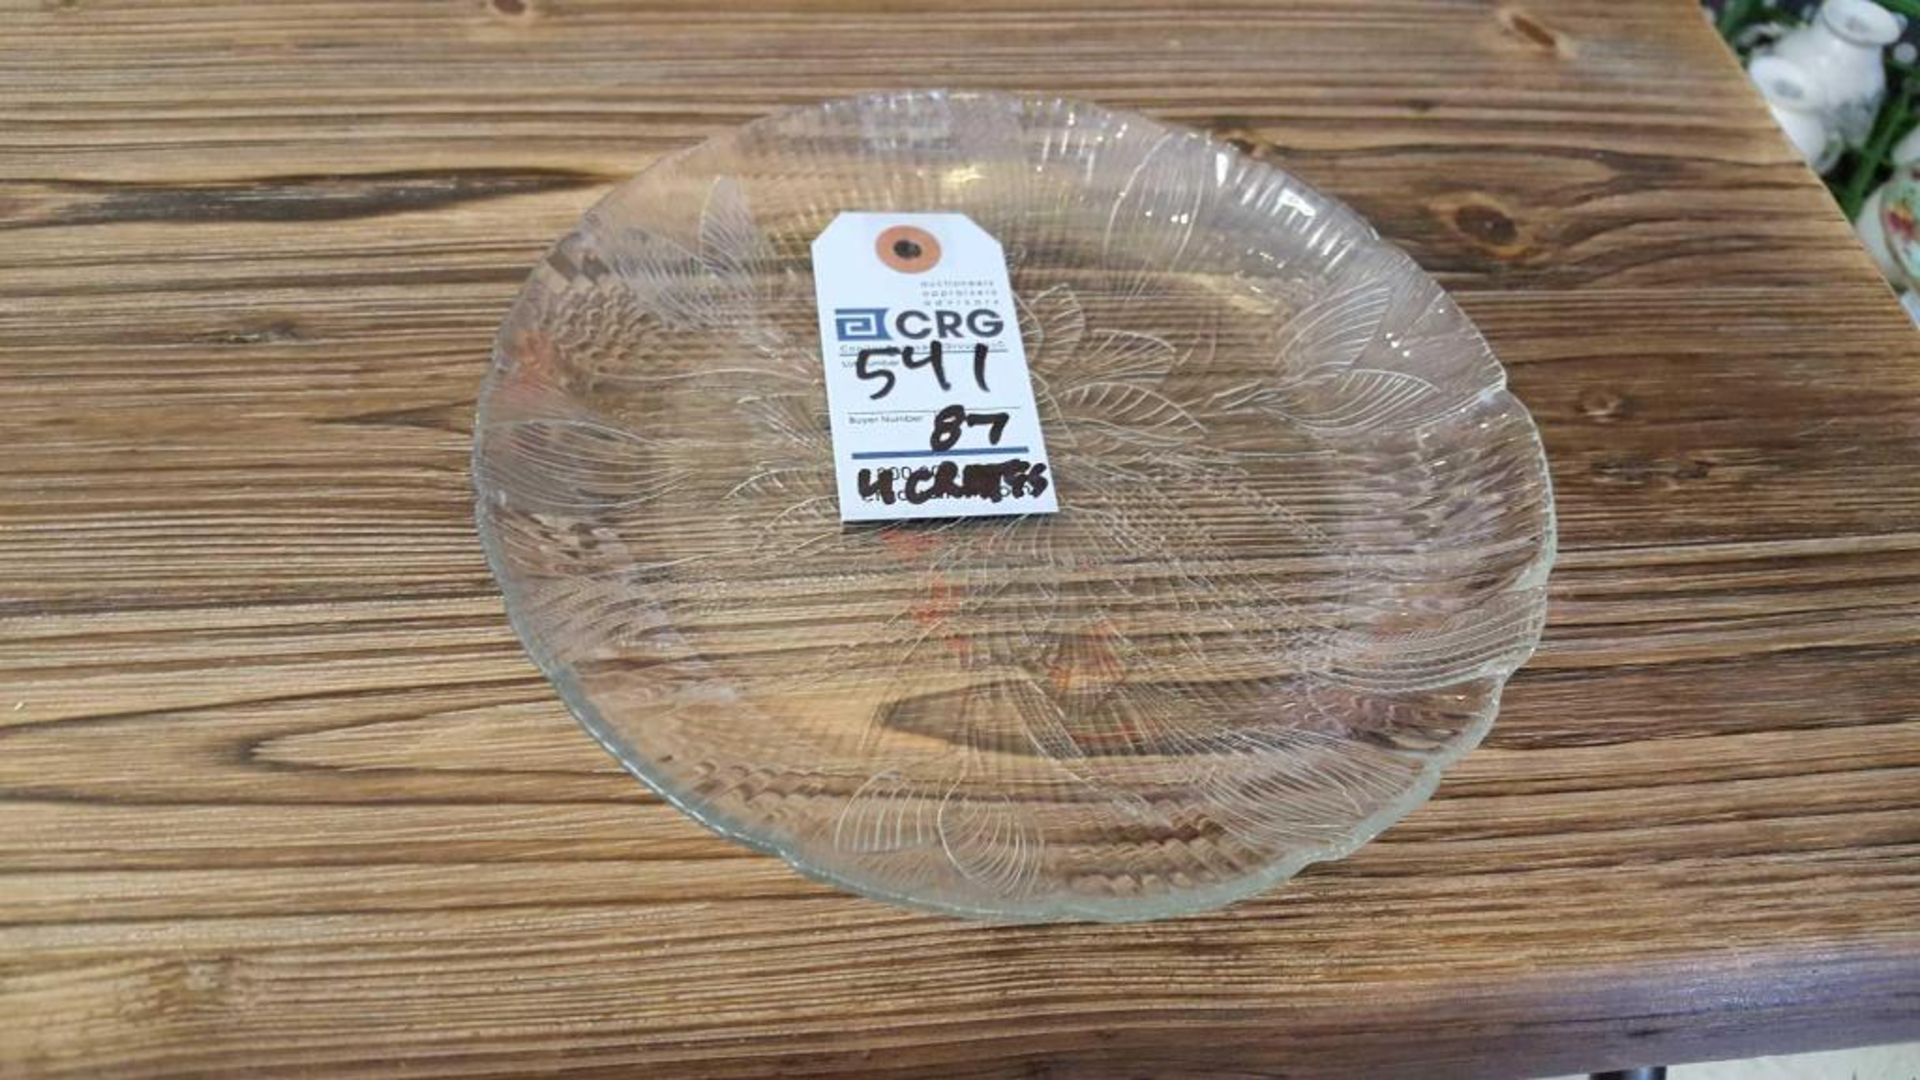 Lot of (87) glass luncheon plates, 7", in 4) wire crates. Add'l fee of $8.00 per wire crate